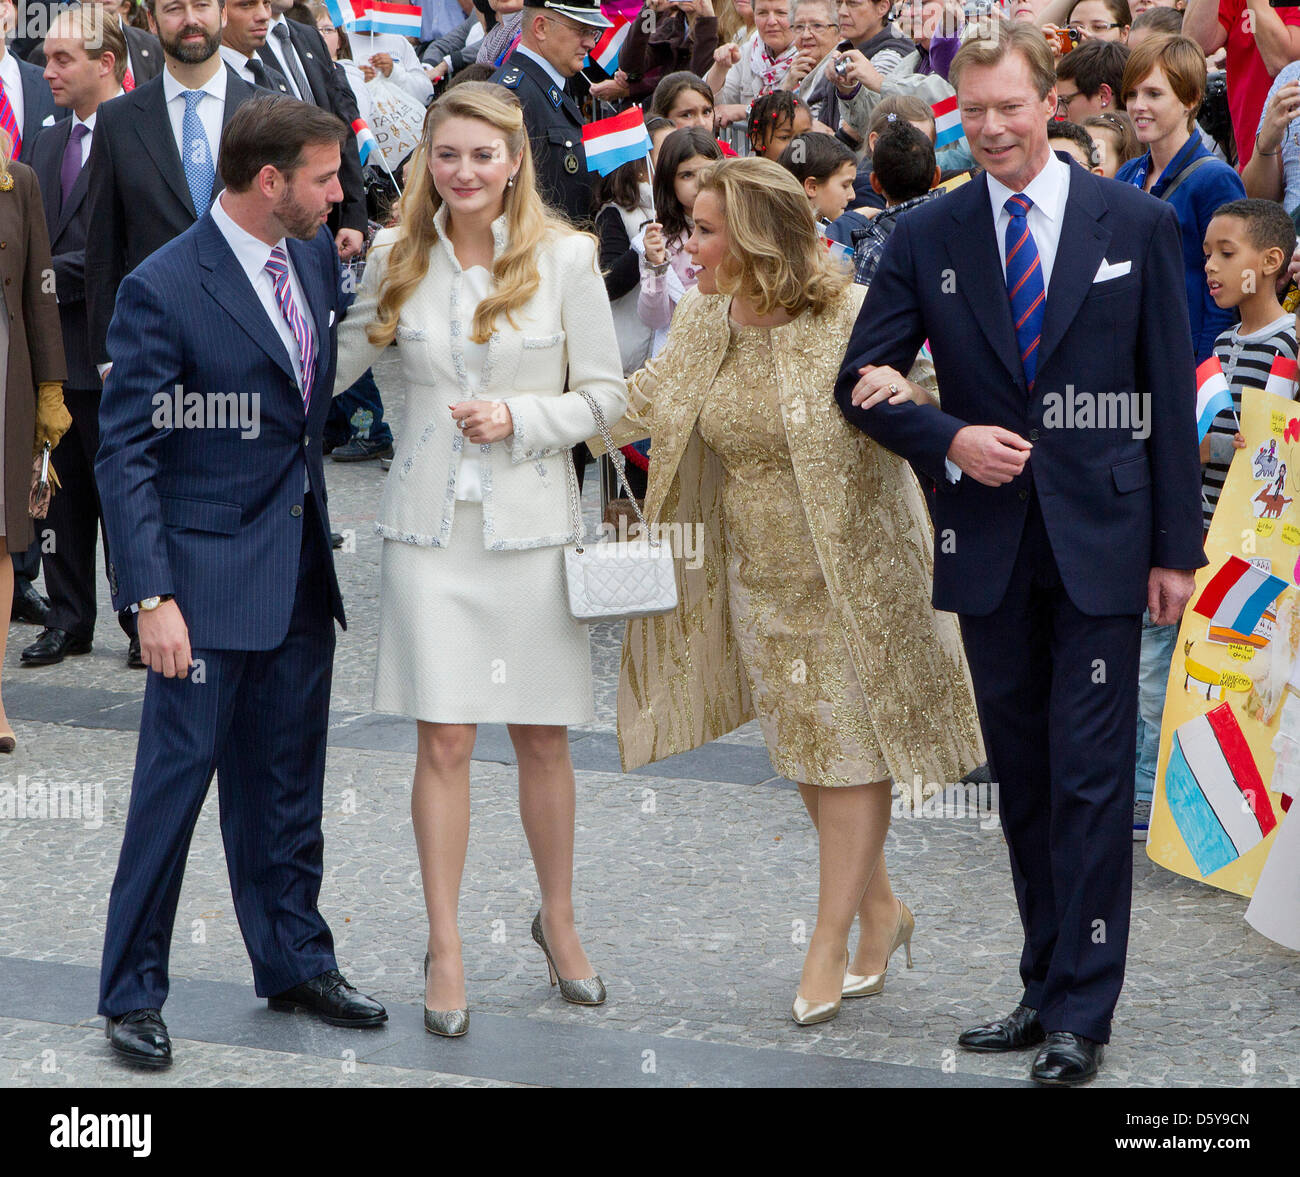 L-R) Prince Guillaume, Hereditary Grand Duke of Luxembourg and Countess  Stéphanie de Lannoy with Grand Duchess Maria Teresa and Grand Duke Henri of  Luxembourg during their civil wedding at the Luxembourg City